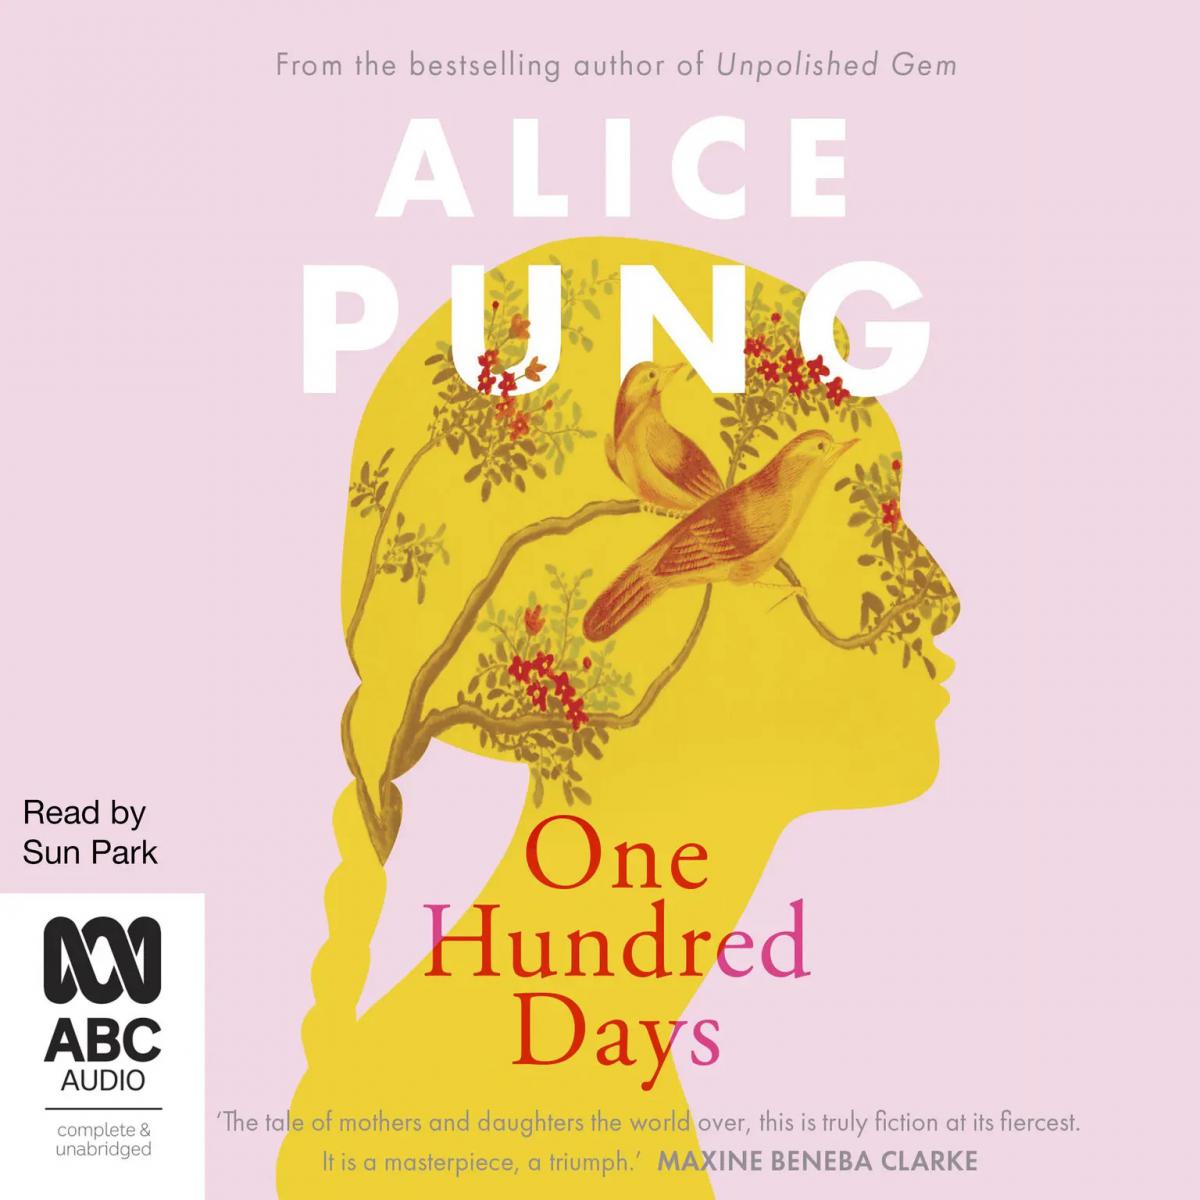 One hundred days, Alice Pung